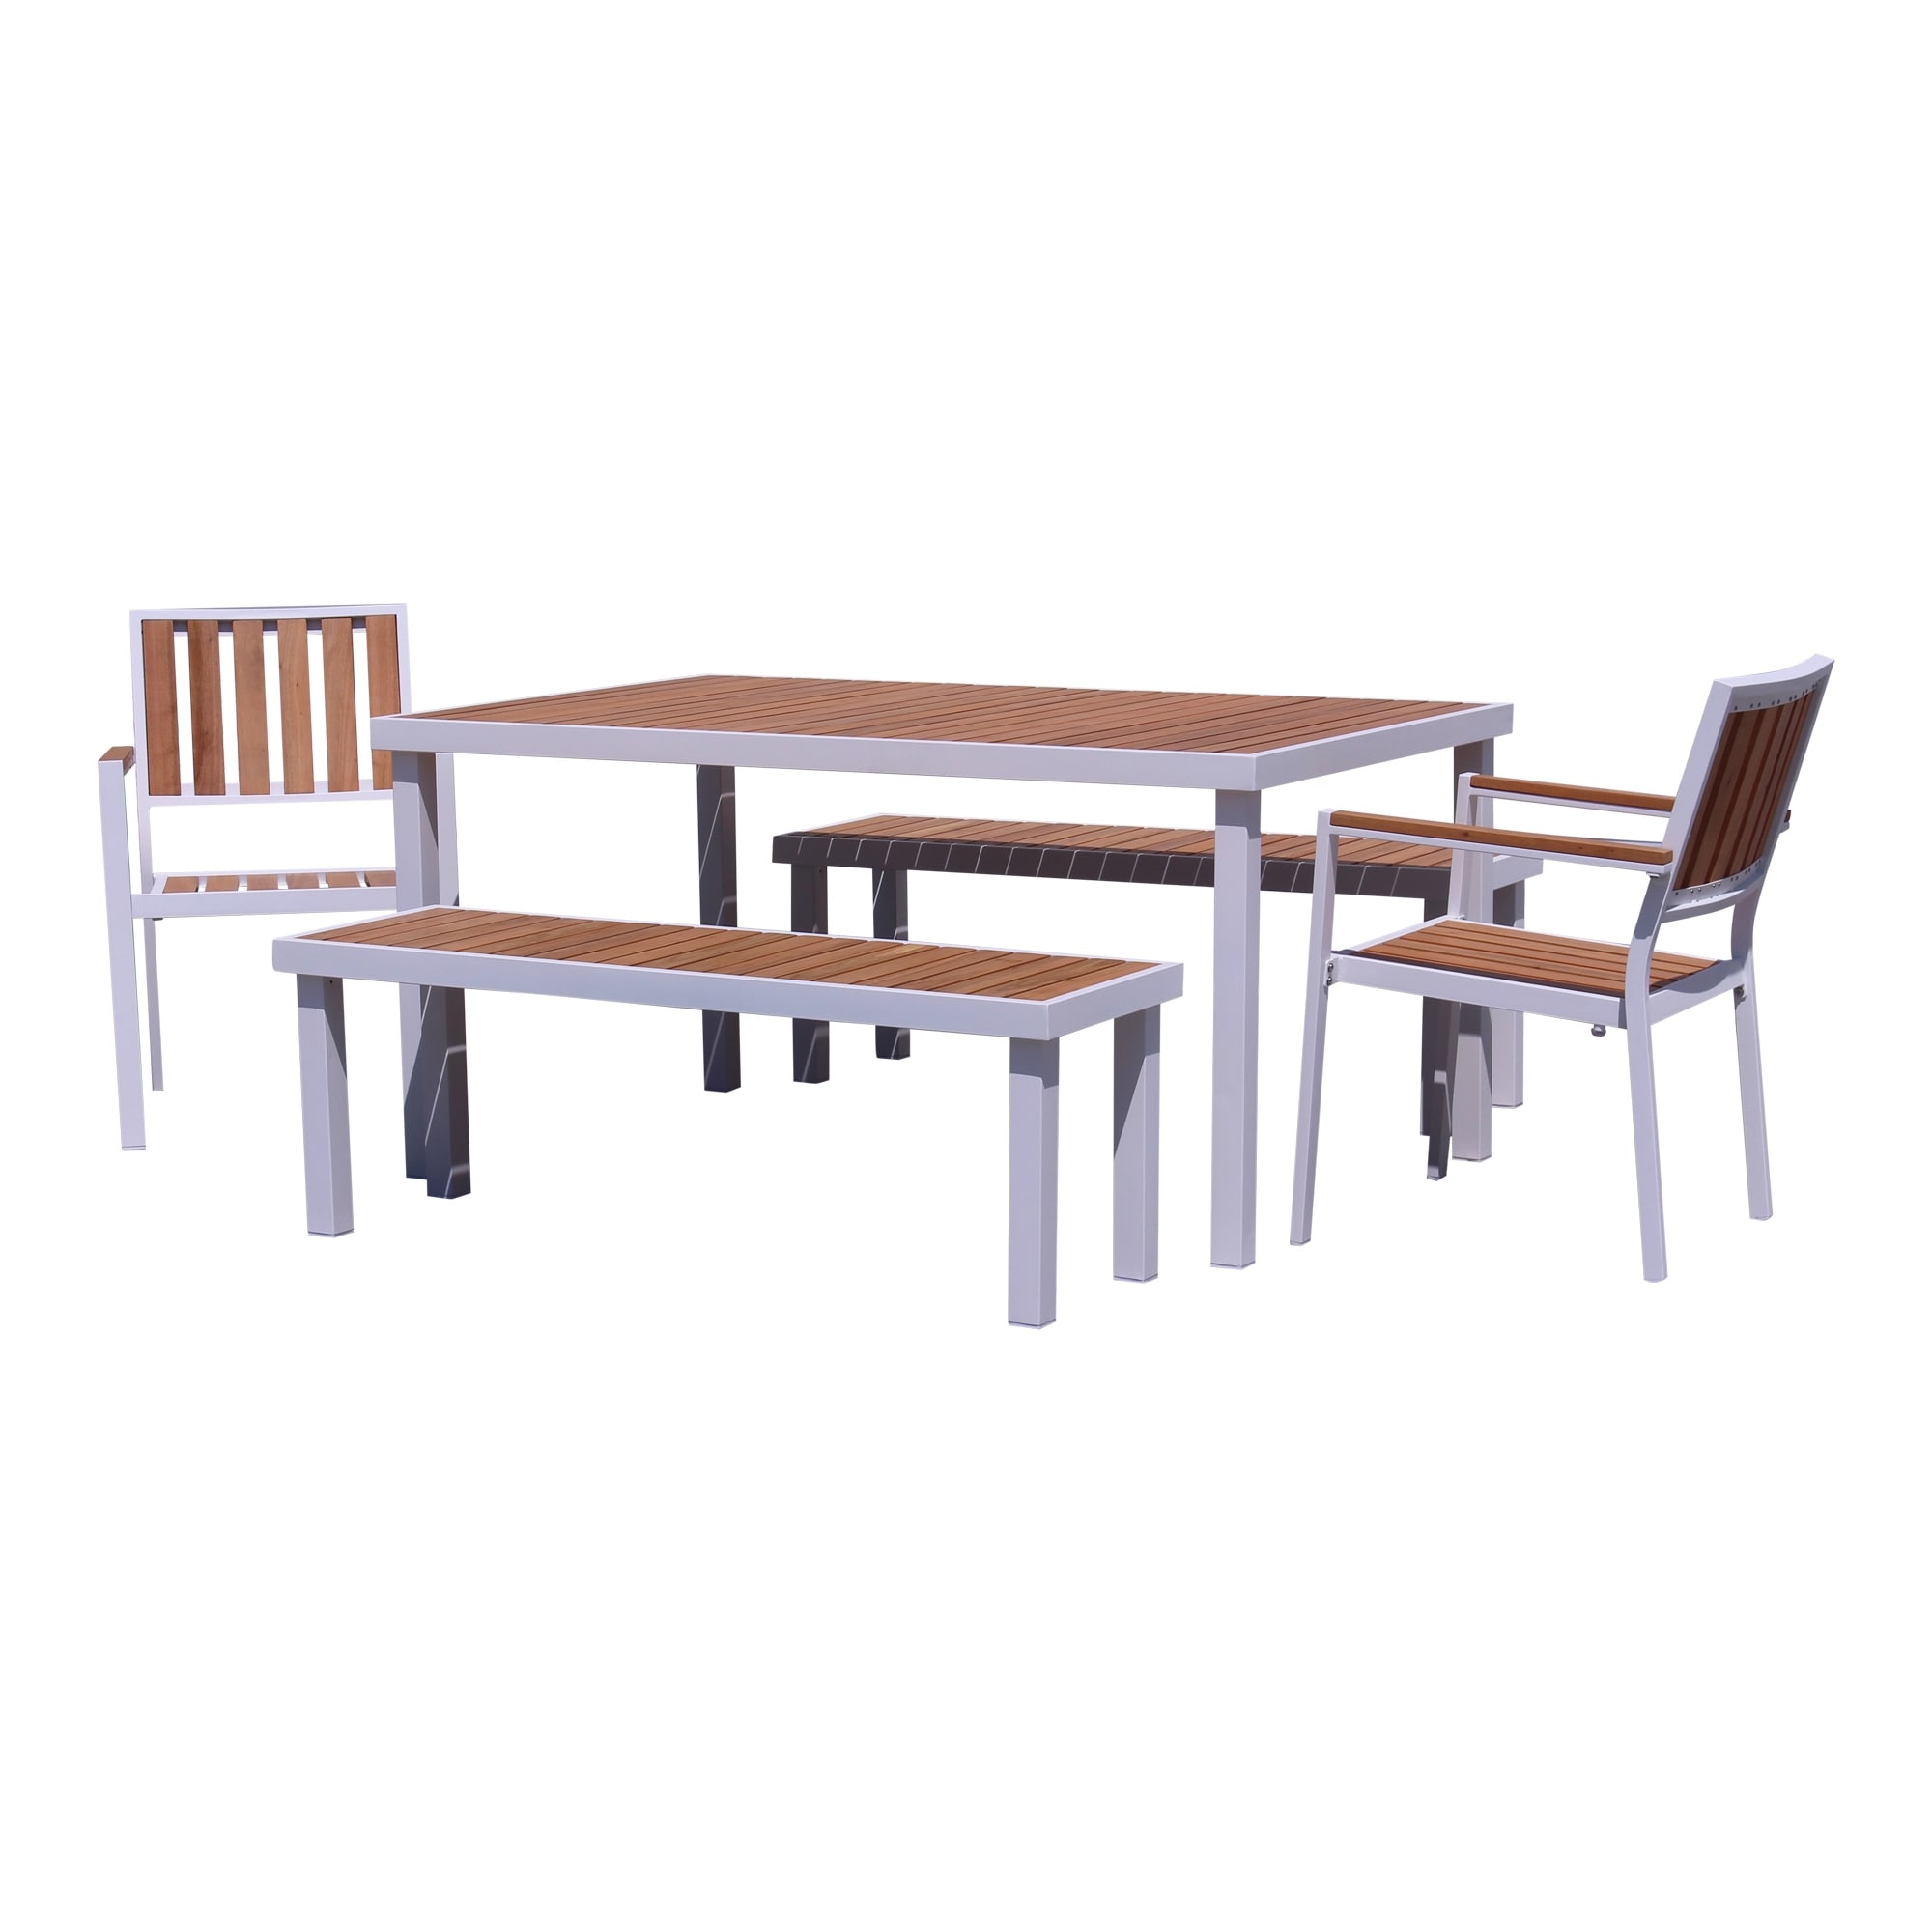 Courtyard Casual Catalina 5 Piece Dining Set With 60x39 Rectangle Table  2 Chairs And 2 Benches